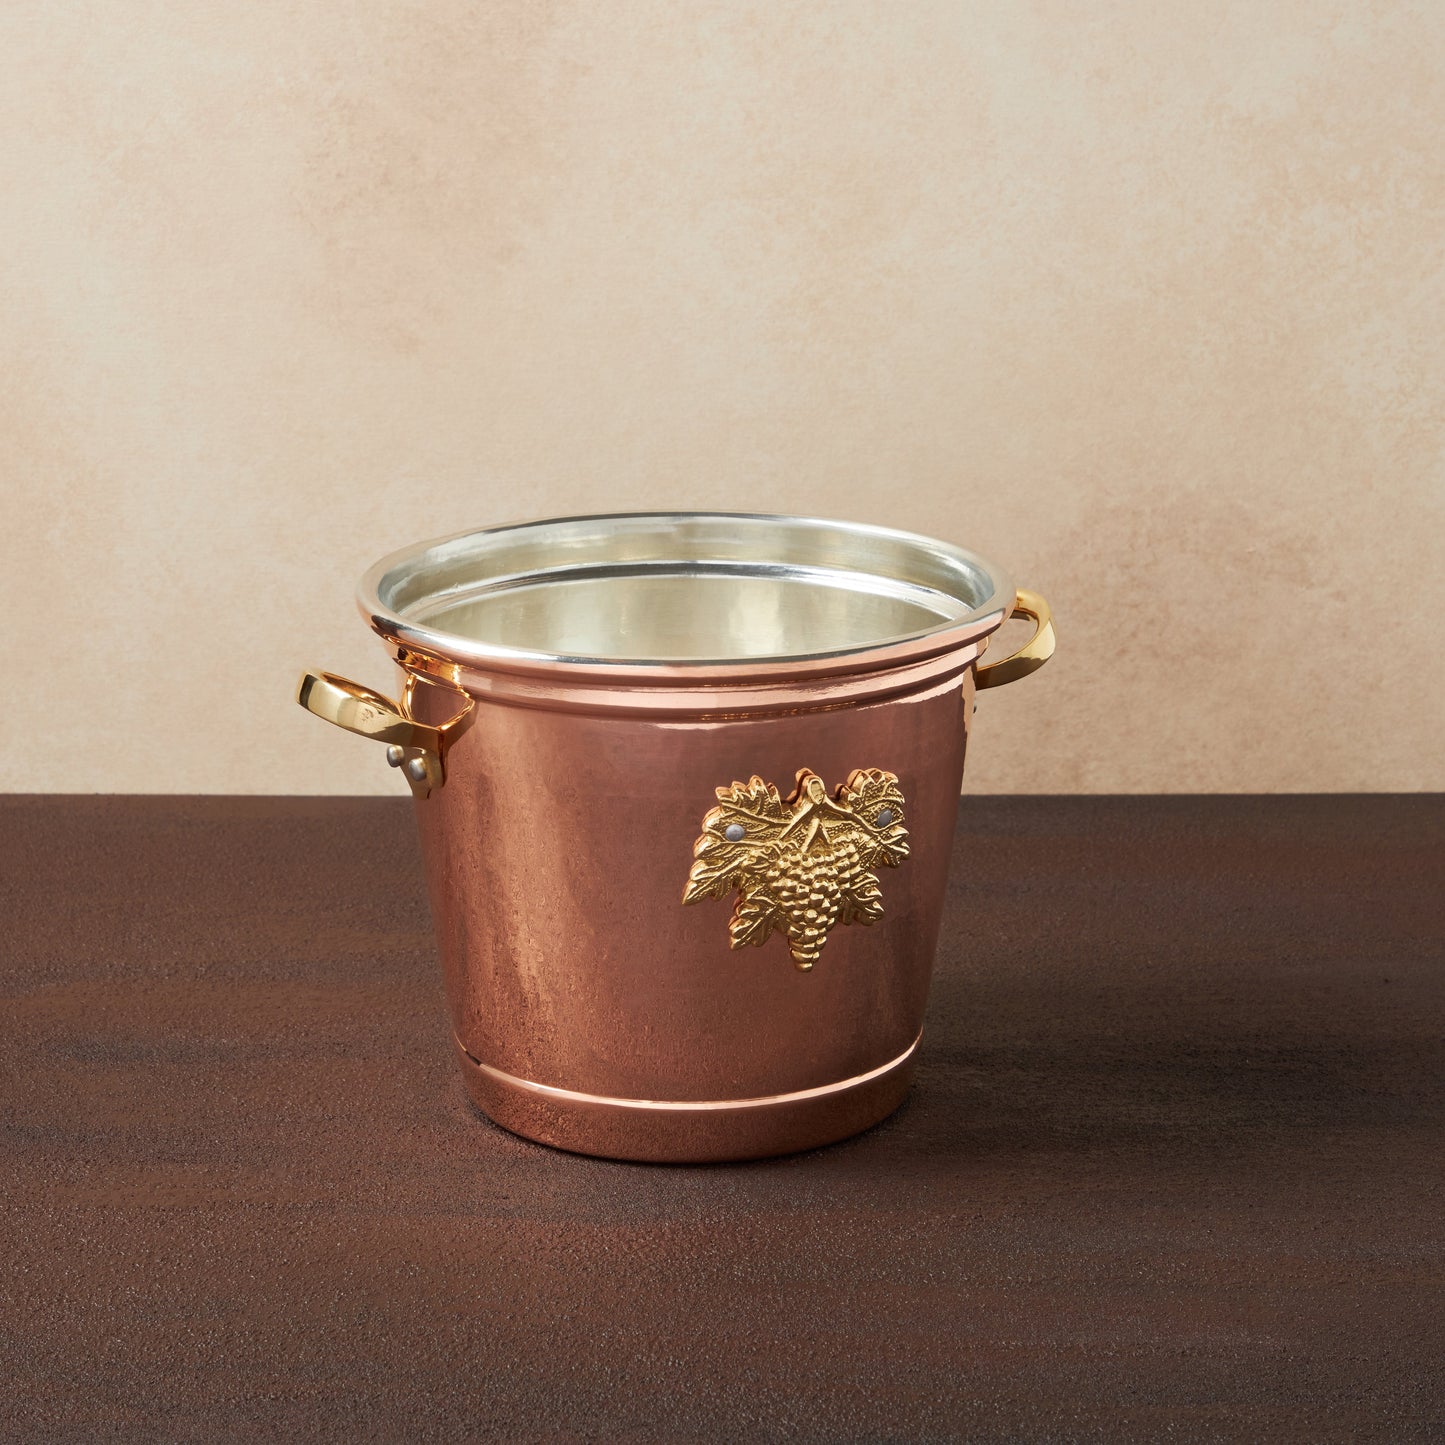 Hammered copper 3.5 Qt Round Wine Bucket lined with high purity tin applied by hand over fire and bronze handles, from Ruffoni Historia collection